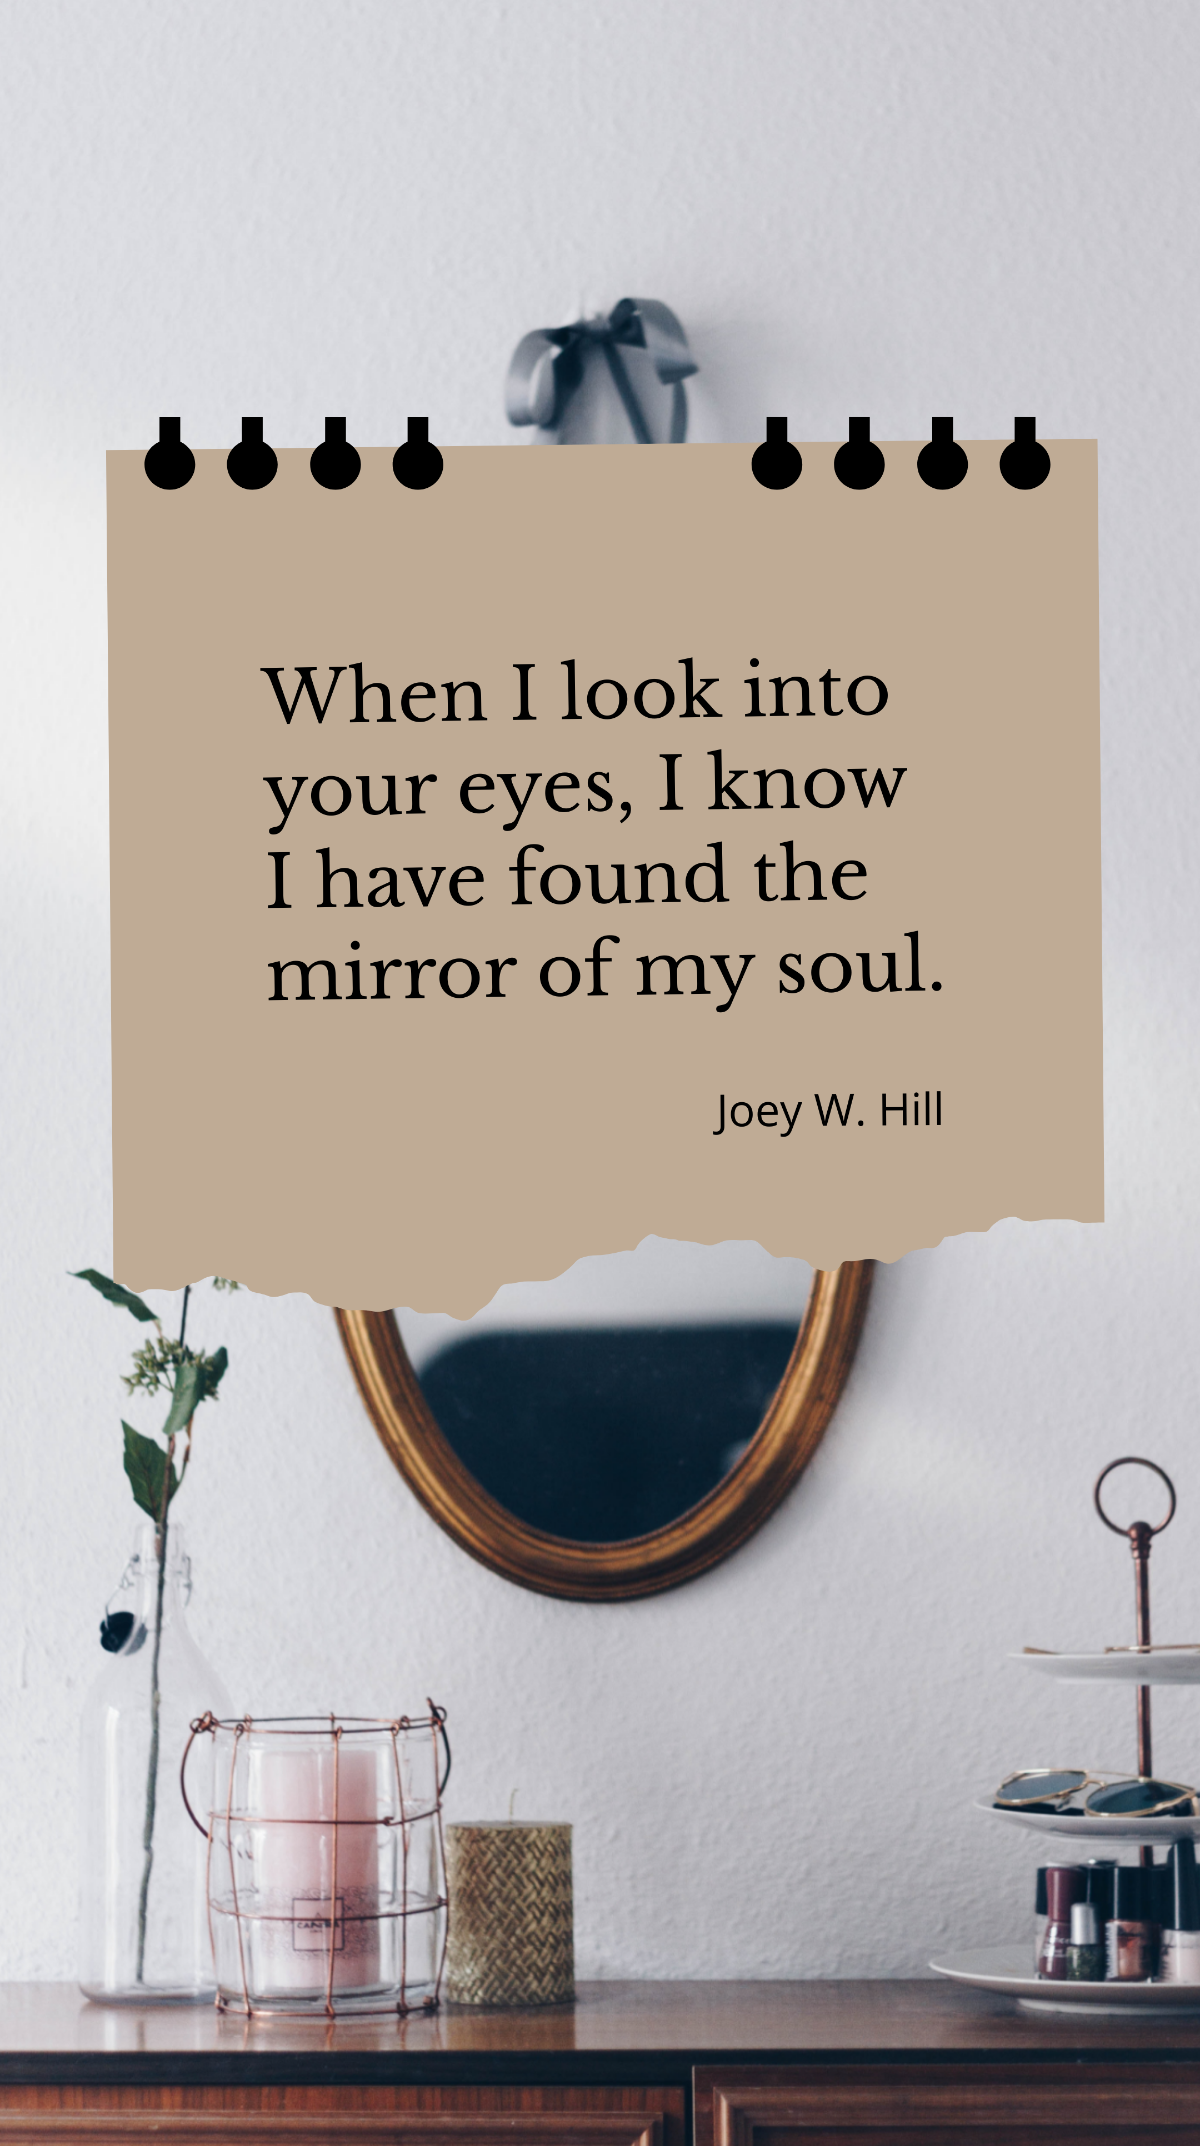 Joey W. Hill - “When I look into your eyes, I know I have found the mirror of my soul.” Template